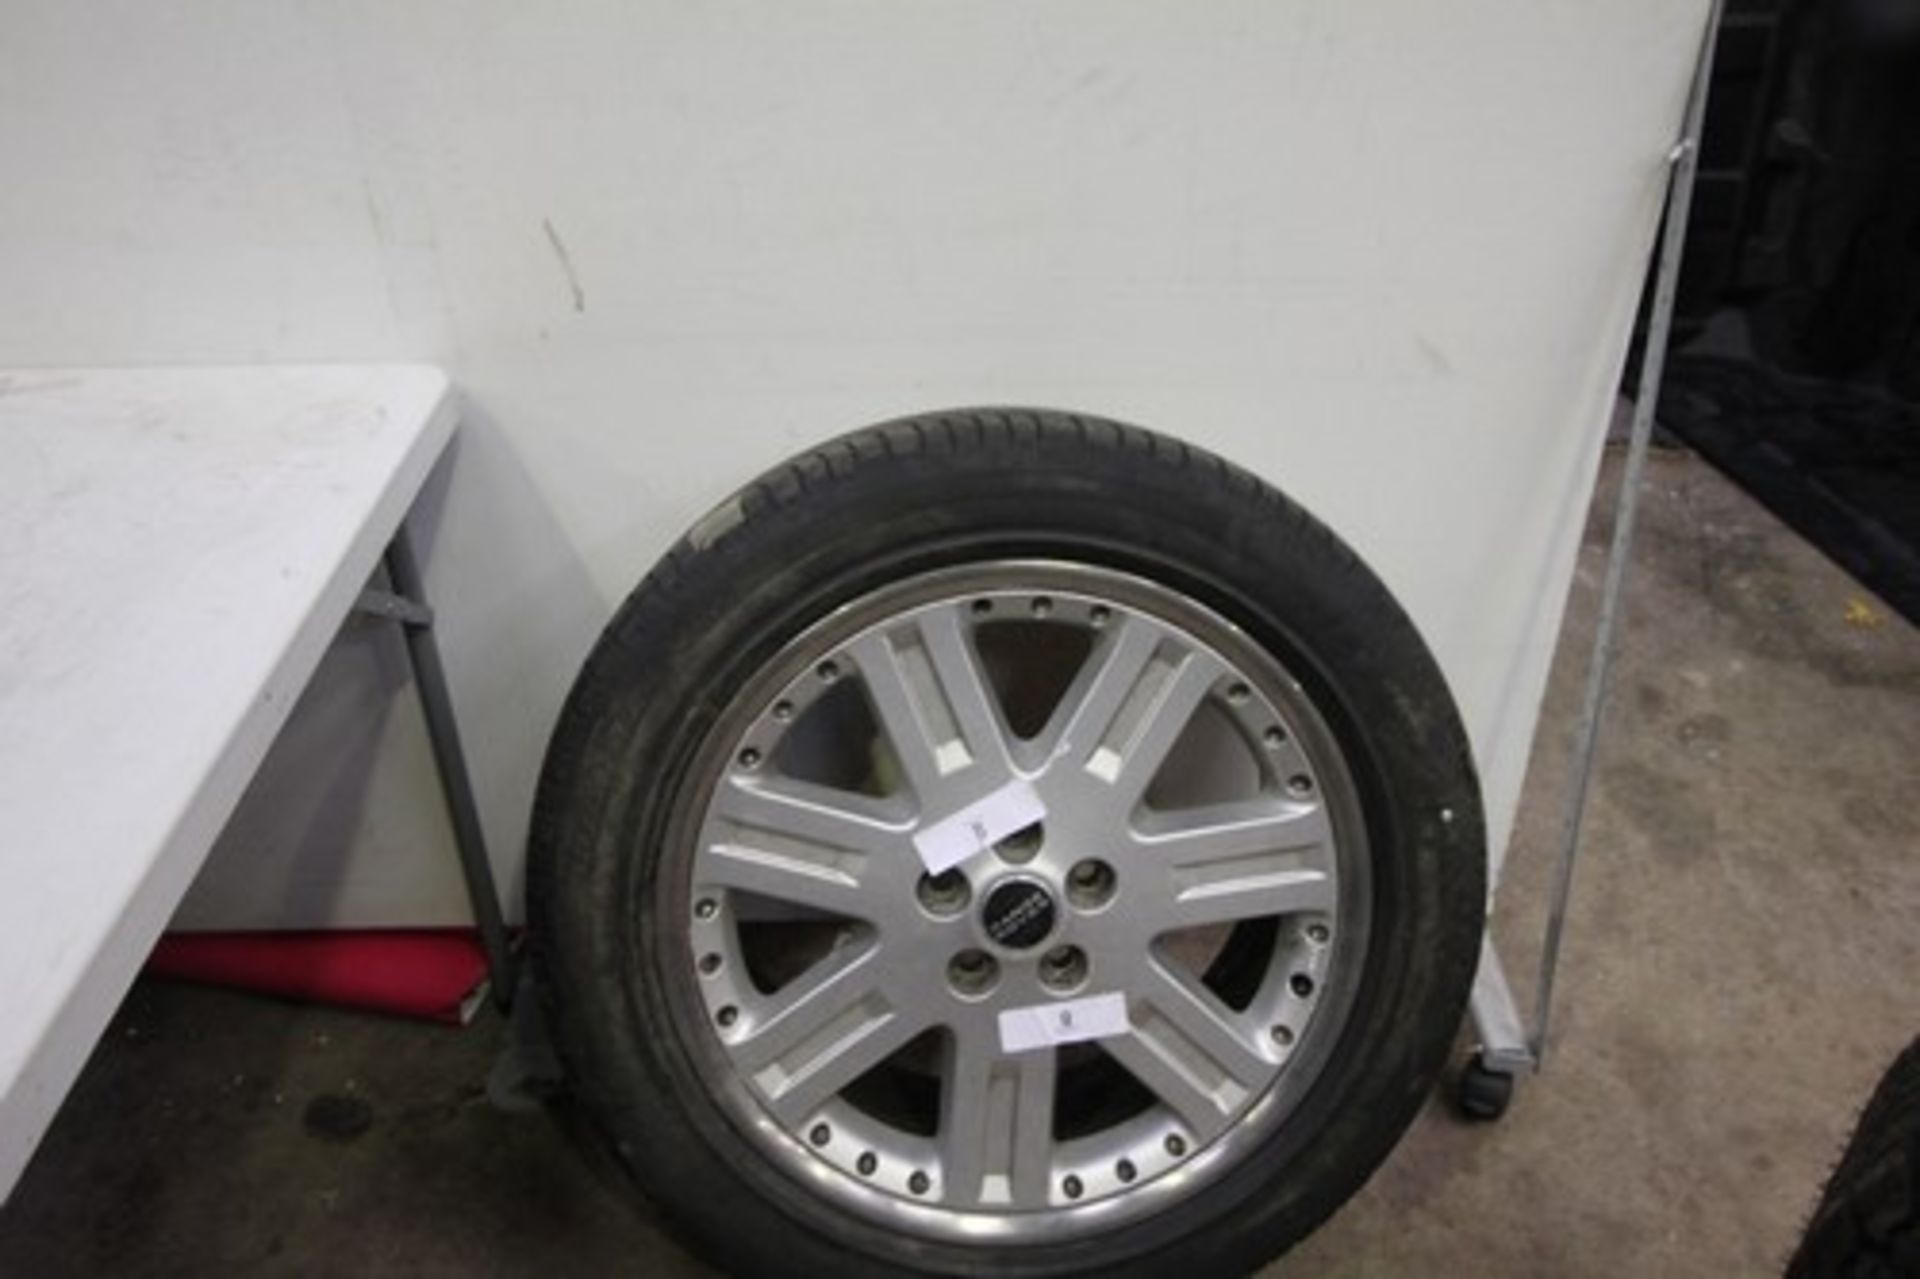 1 x Range Rover alloy wheel fitted with 1 x used Michelin tyre, size 255/50 R20V, low on tread - - Image 2 of 2